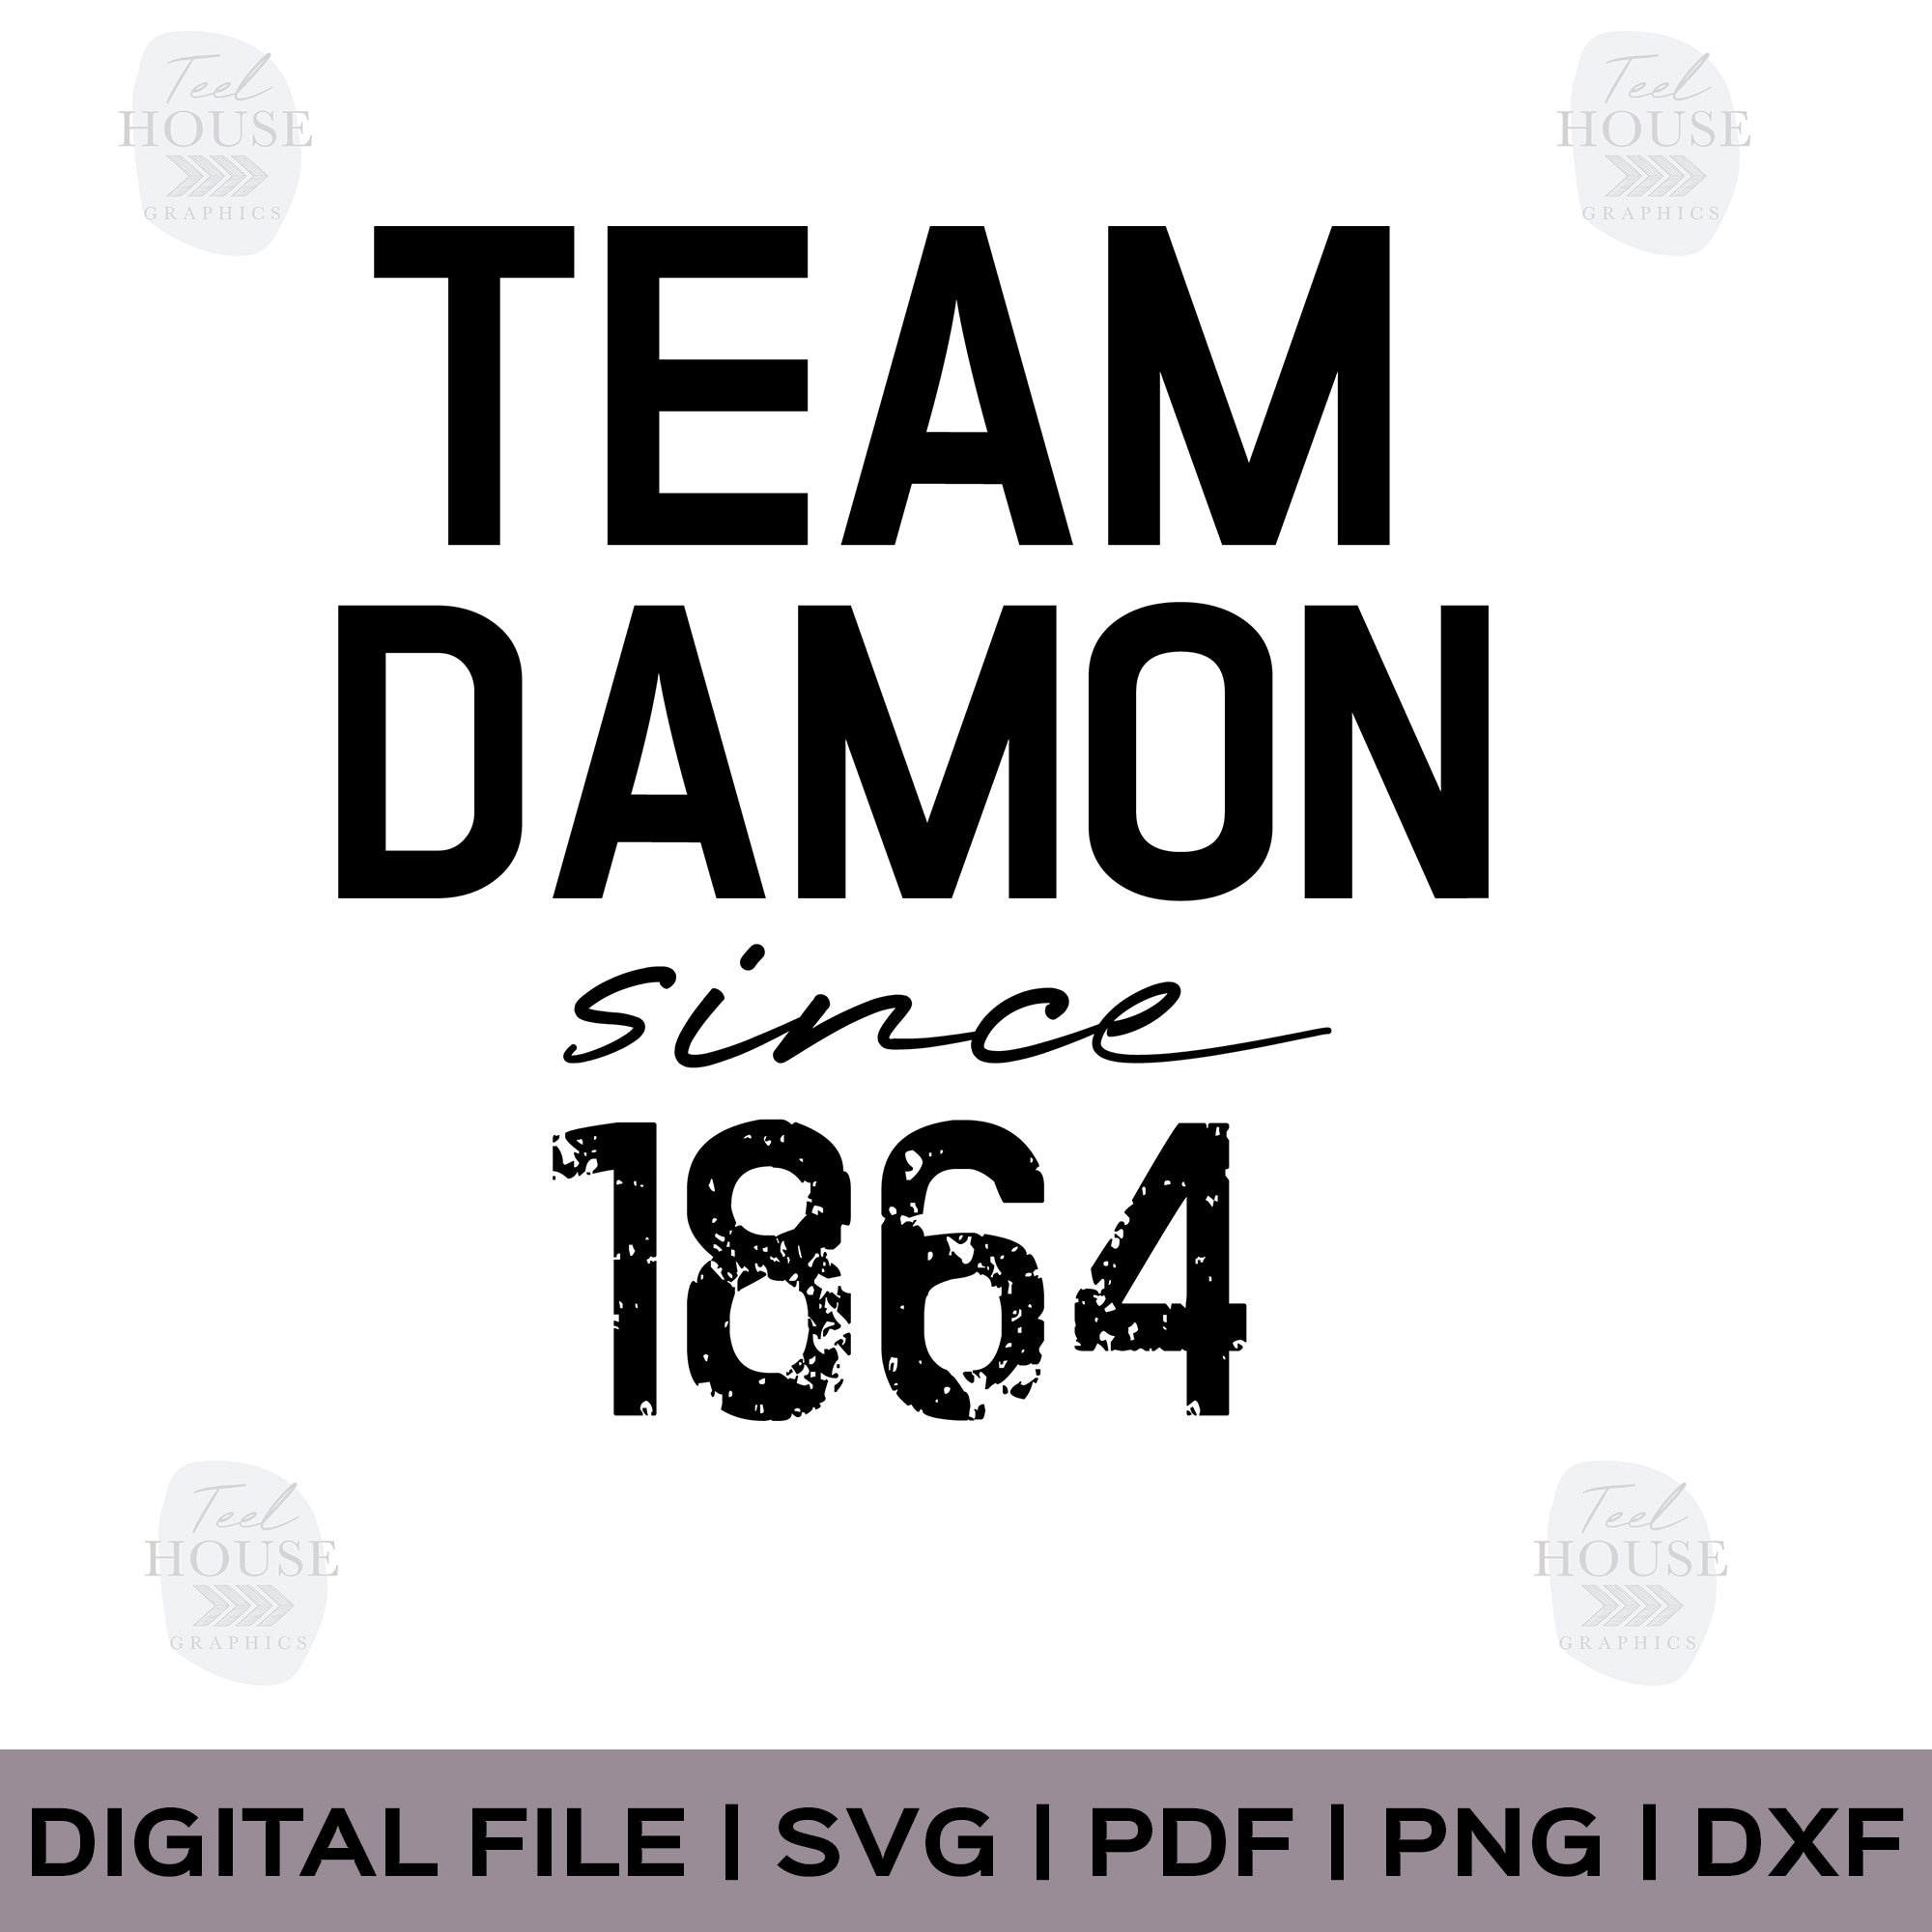 Buy > team damon since hello brother > in stock